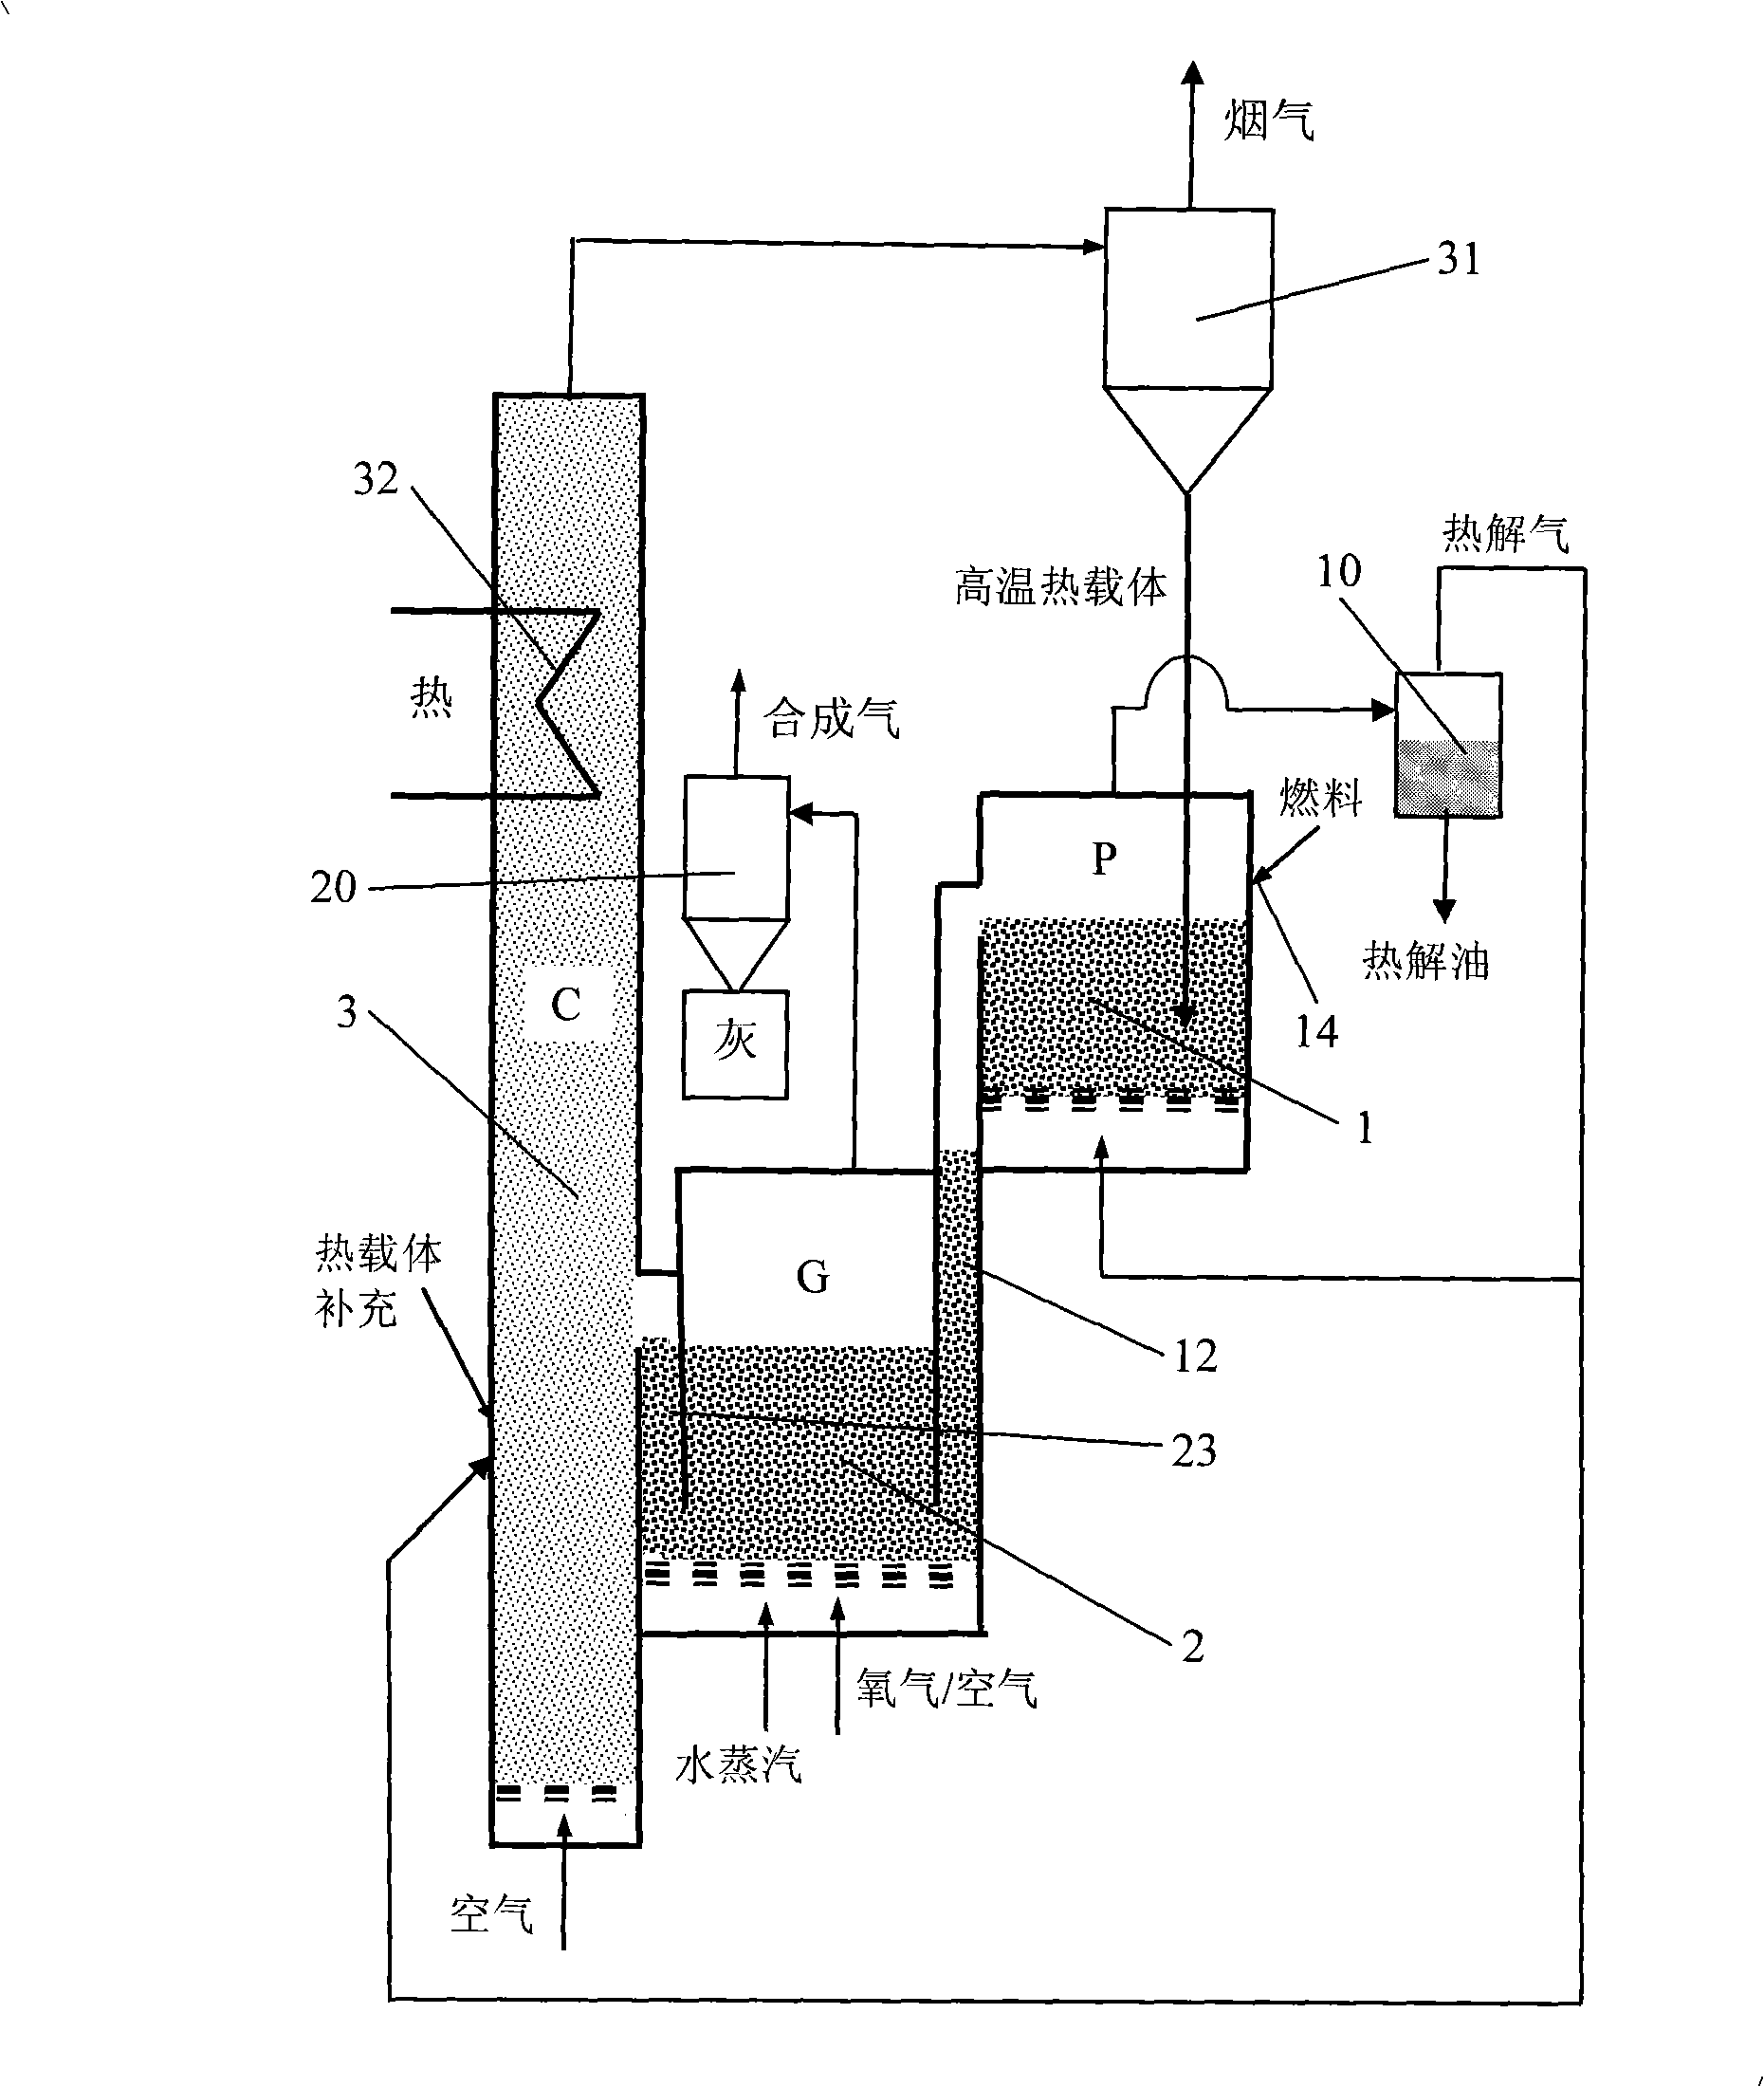 Combined thermal transition method and apparatus for solid fuel